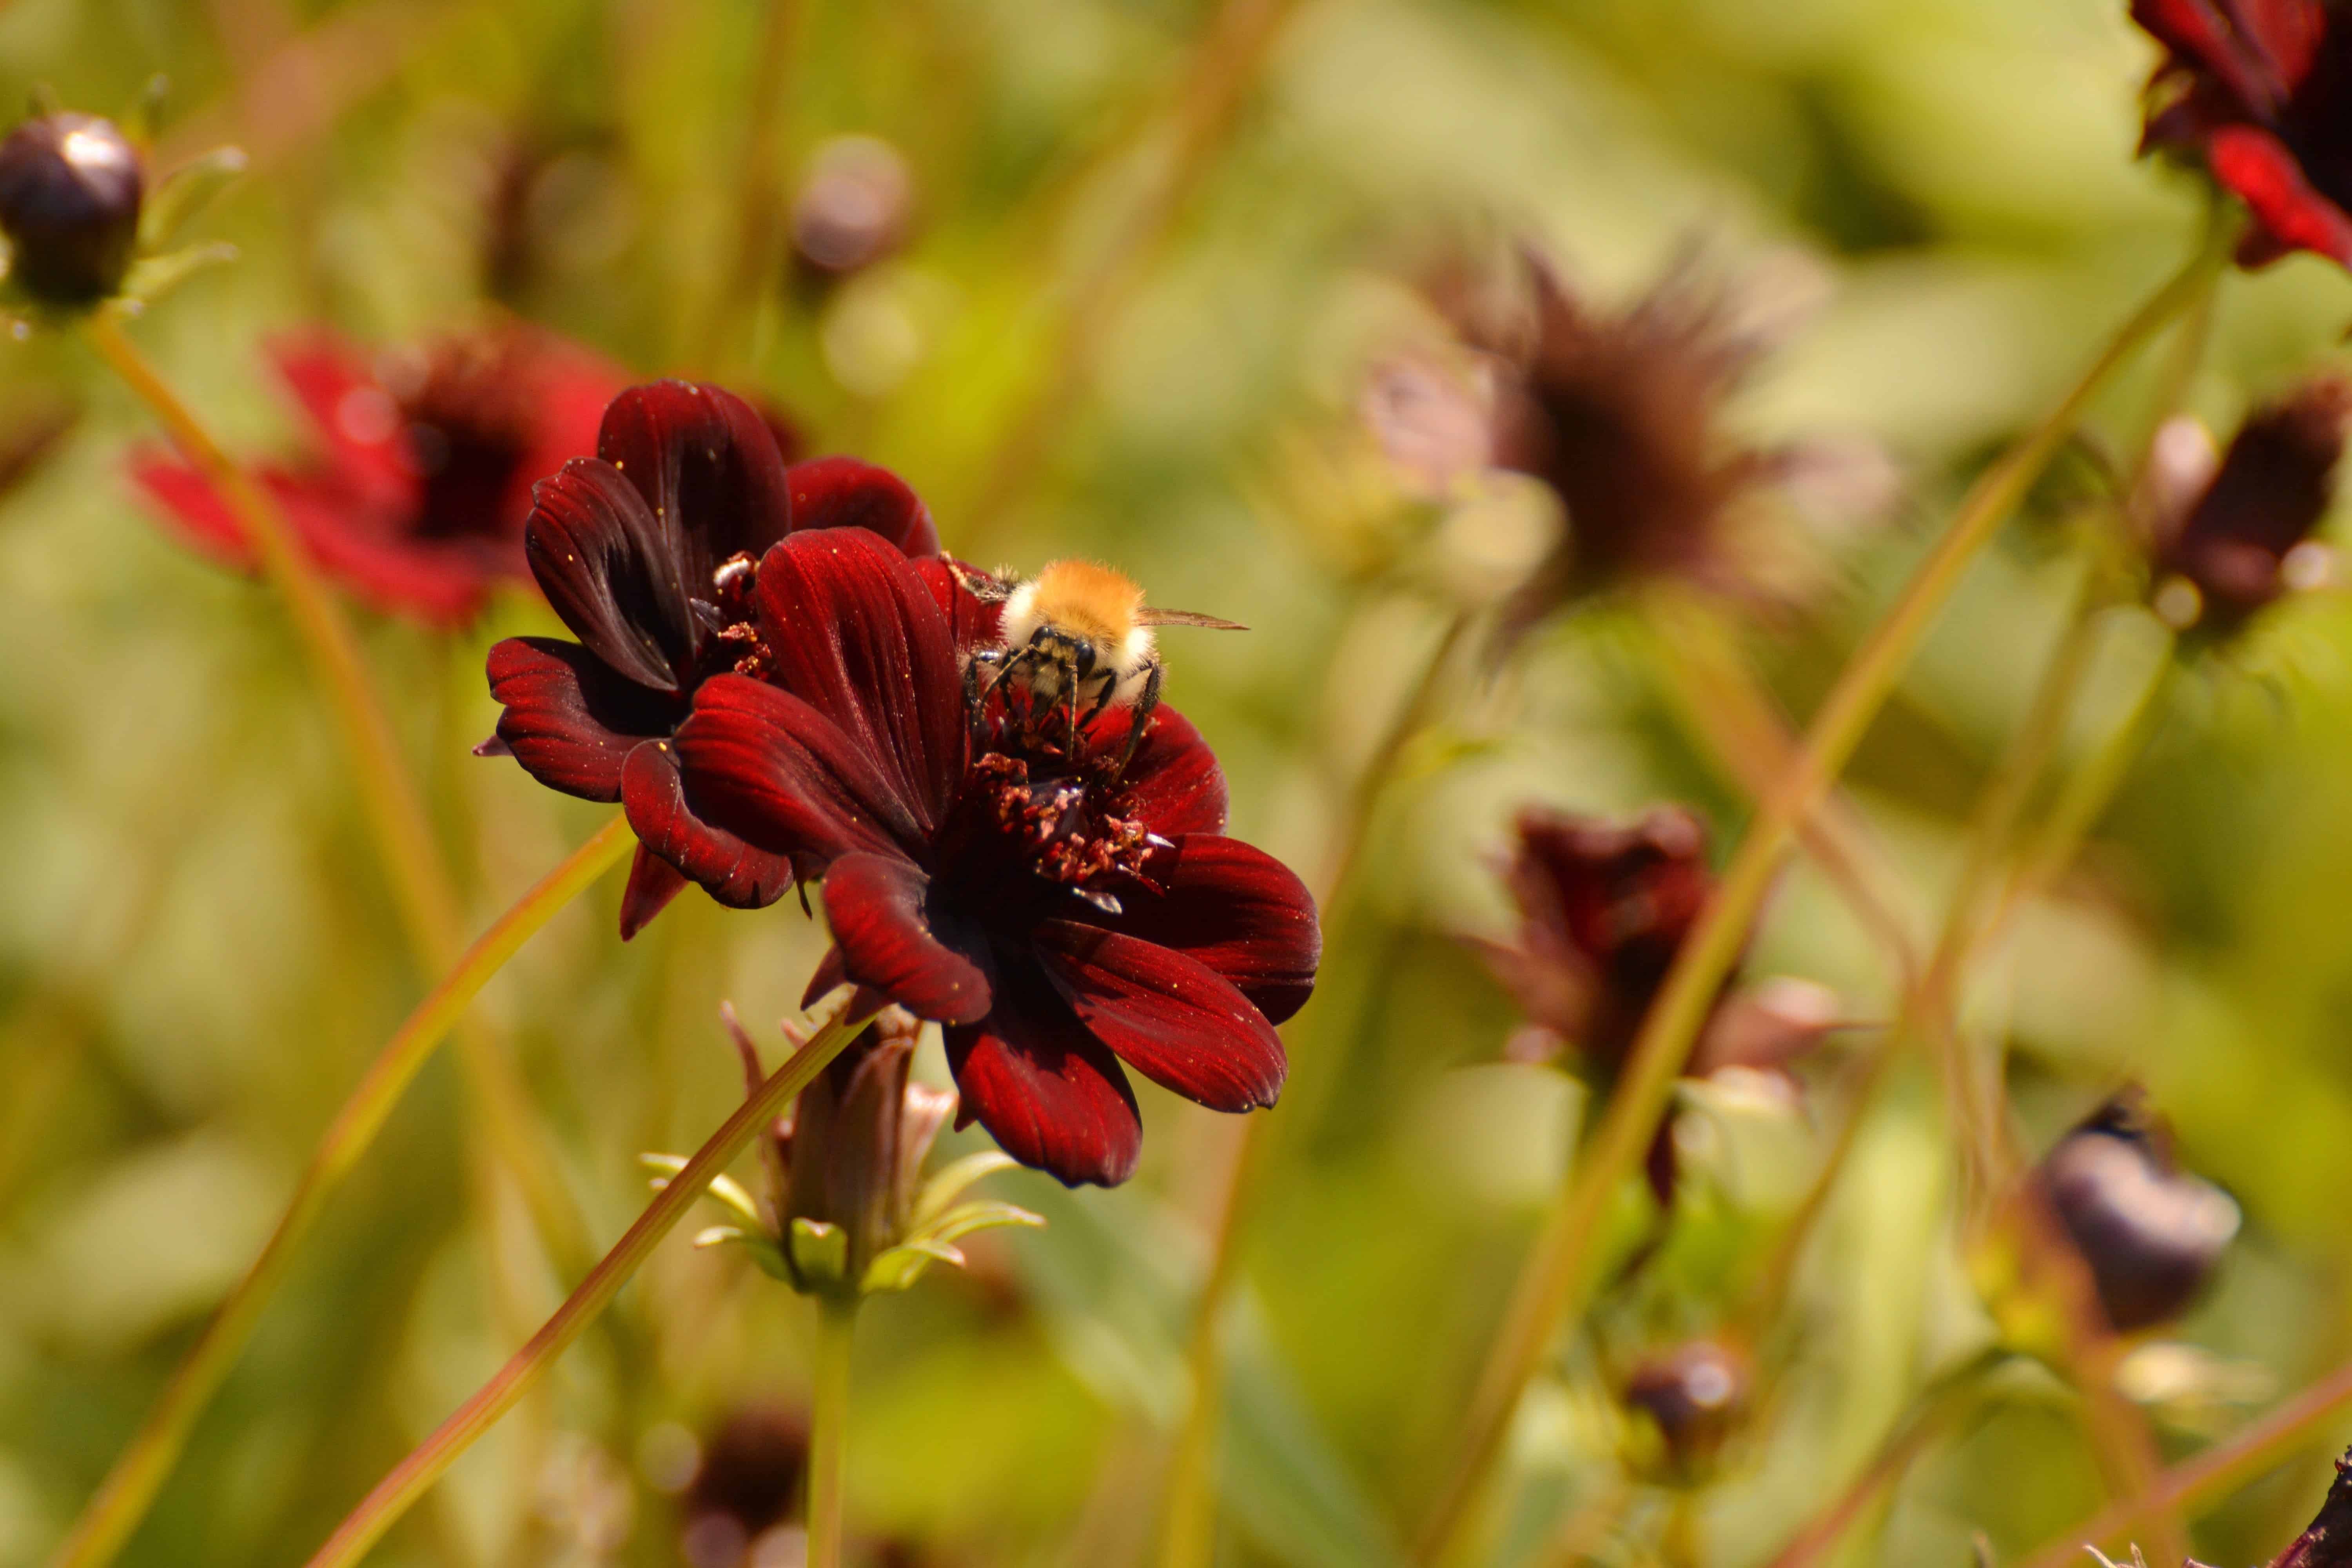 Having more flowers in urban areas can do wonders for pollinators. Image in public domain.